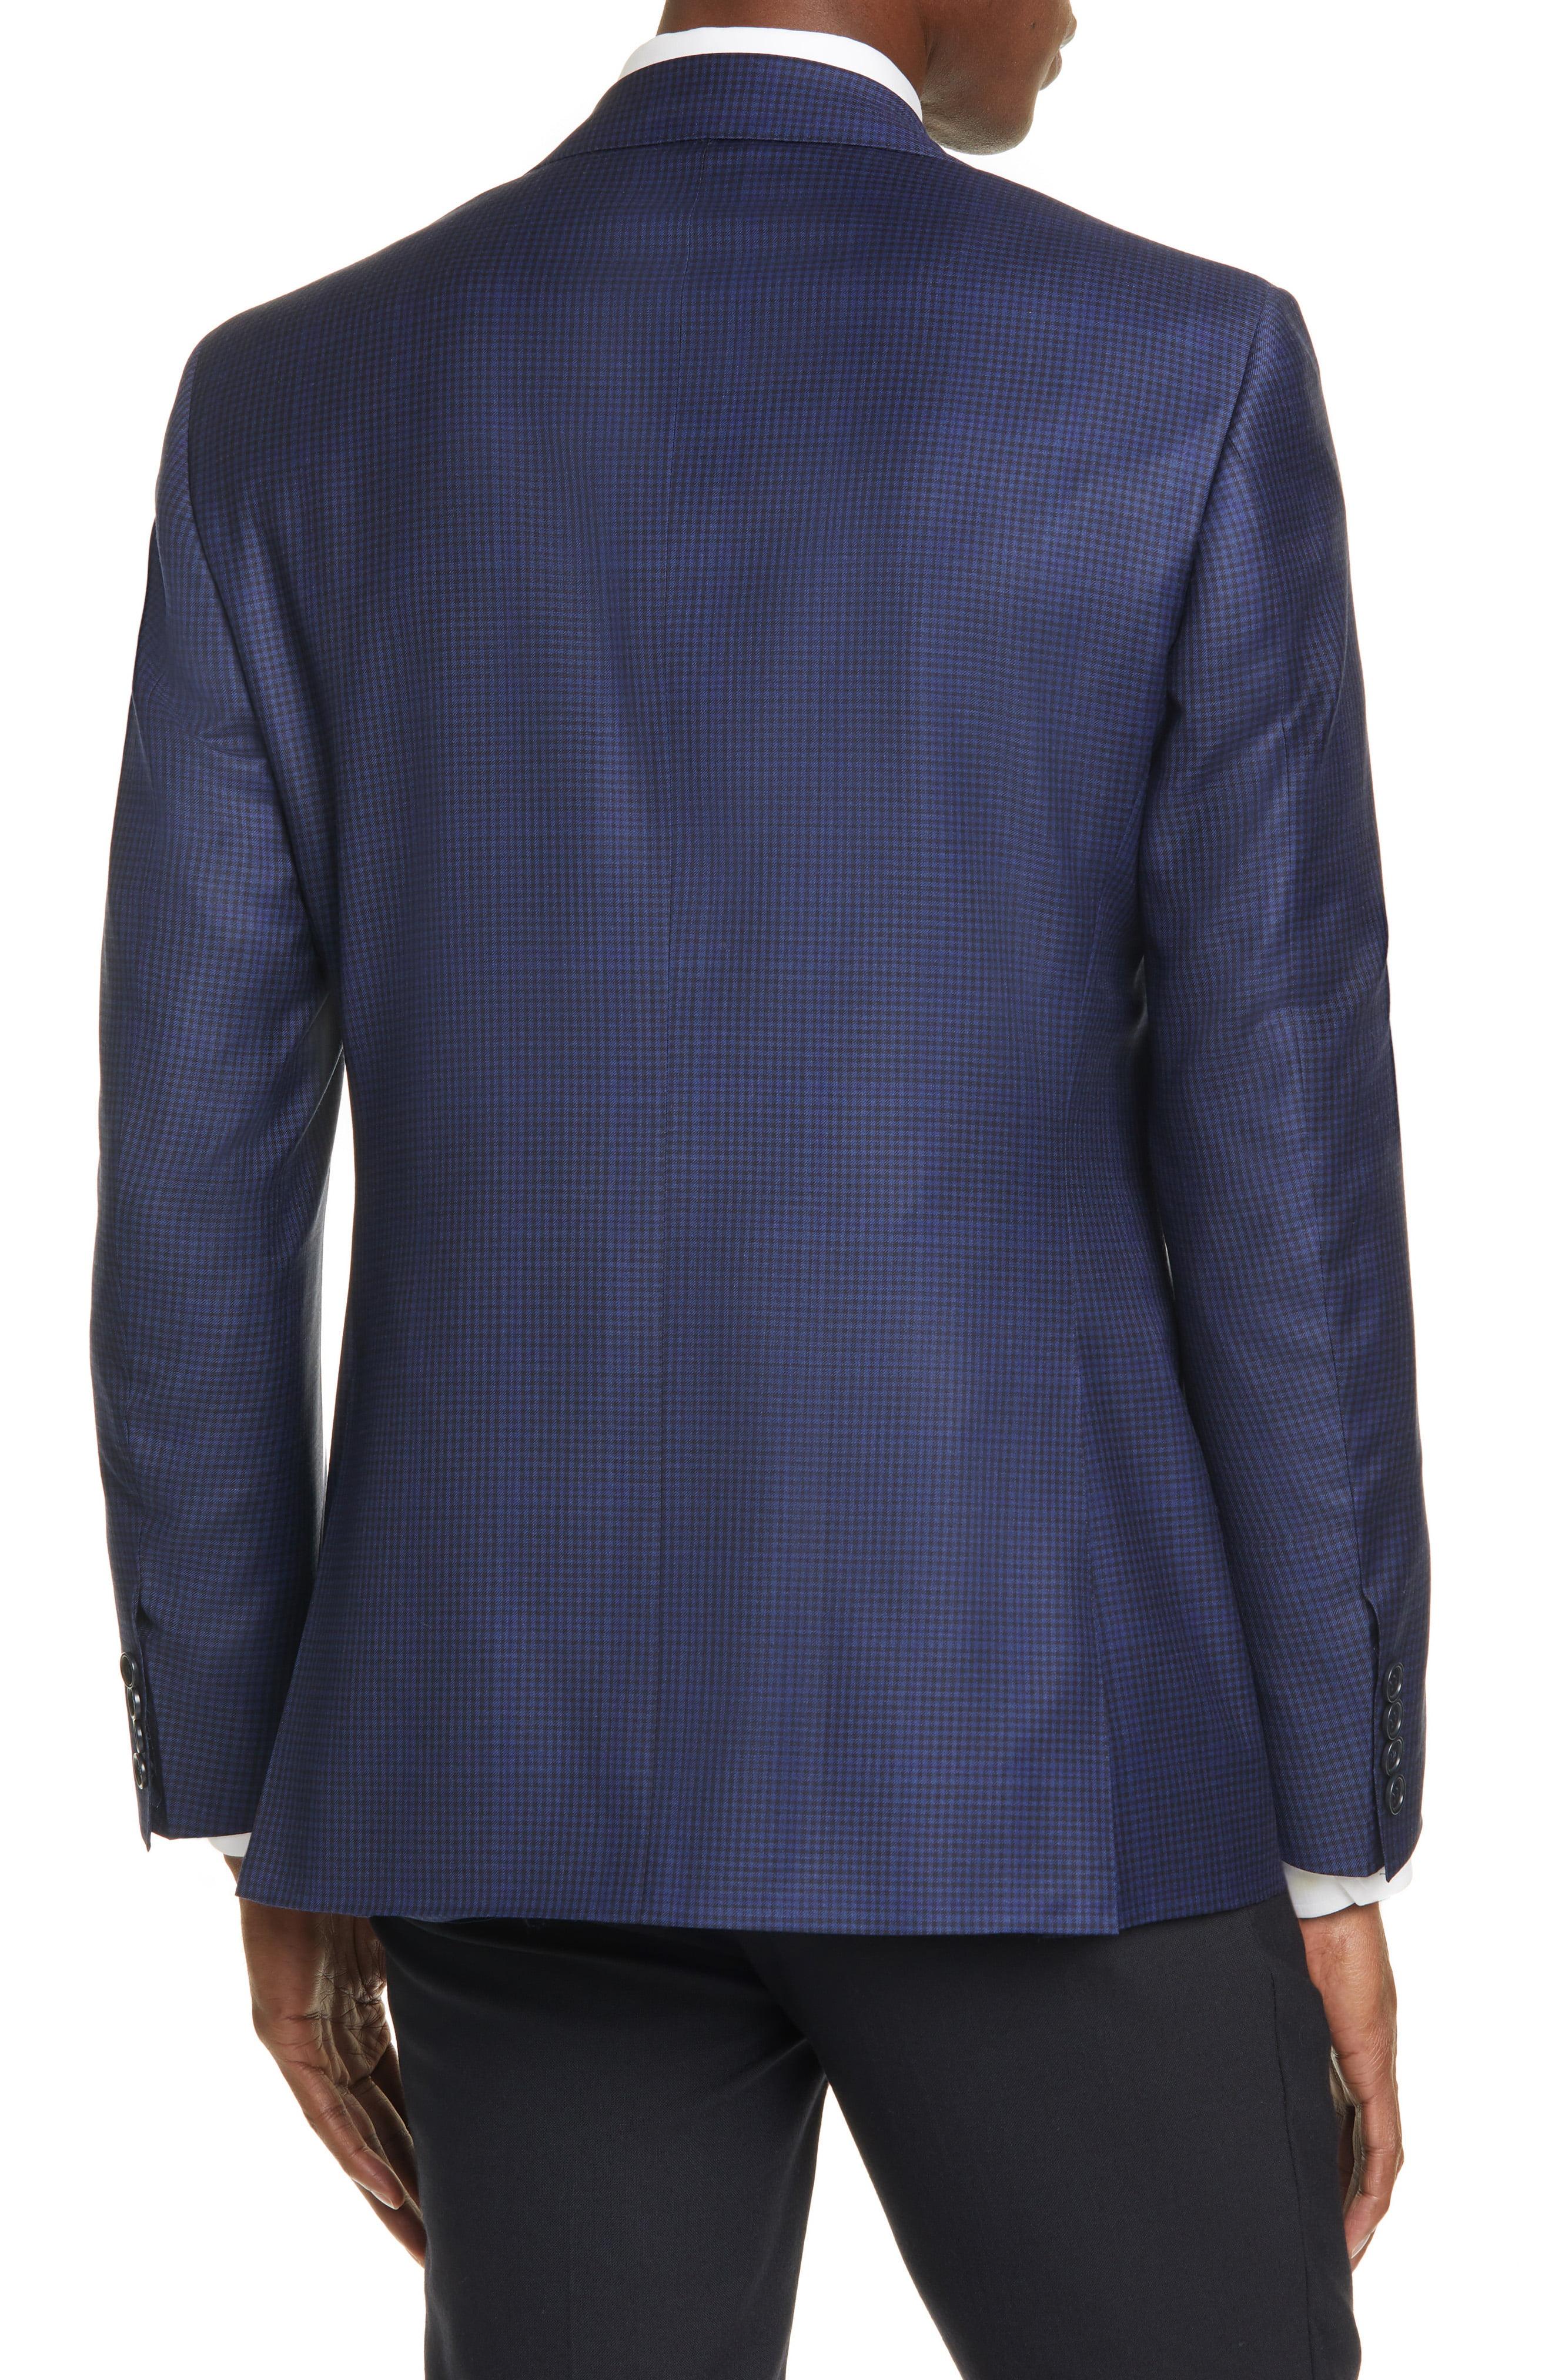 Canali Classic Fit Check Wool Sport Coat in Blue for Men - Lyst